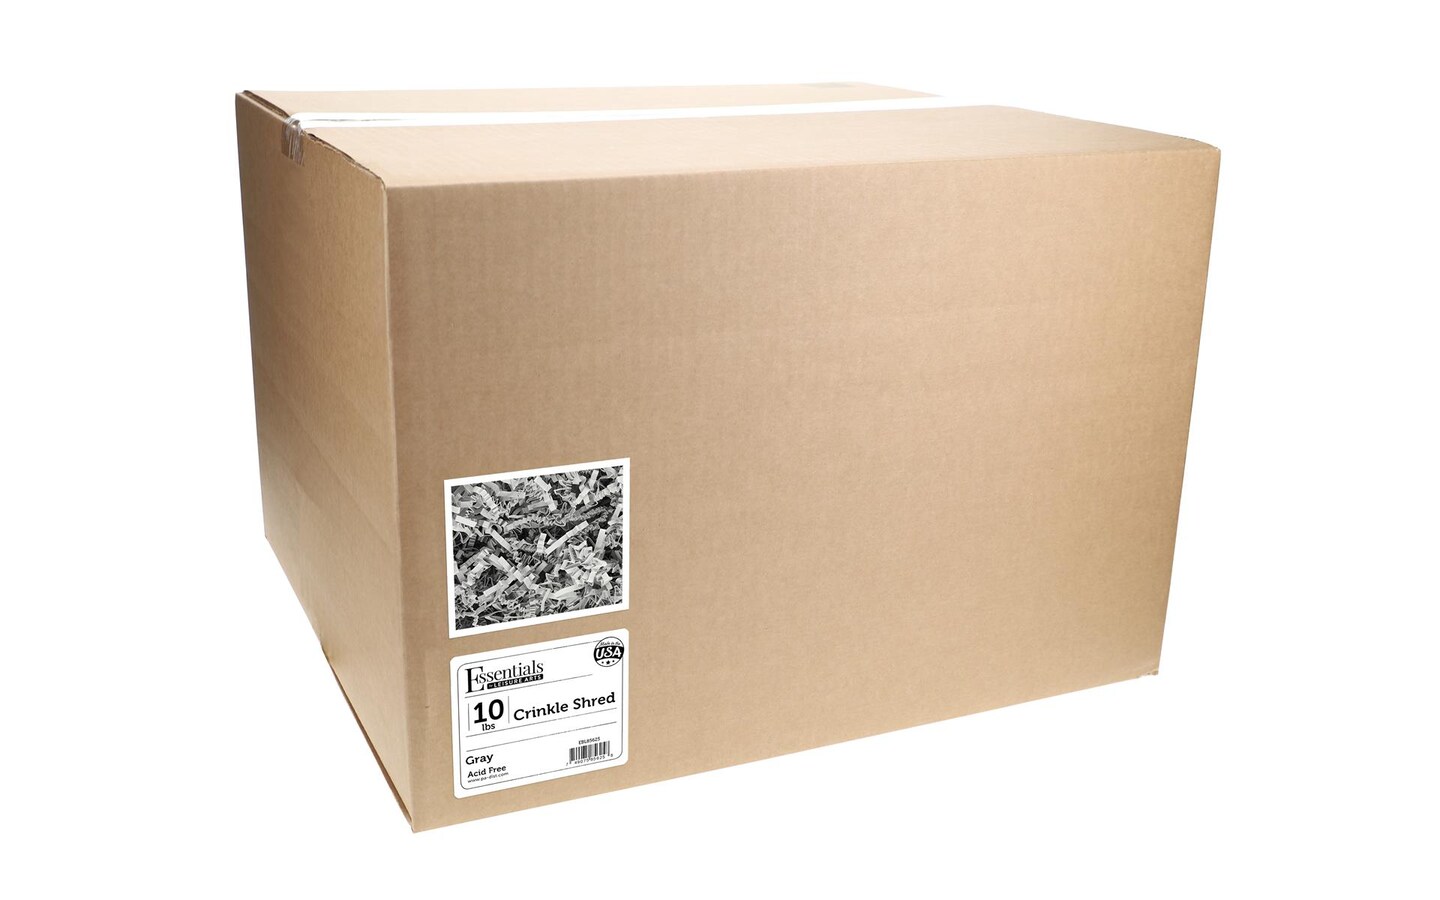 Essentials by Leisure Arts Crinkle Shred Box, Gray, 10lbs Shredded Paper Filler, Crinkle Cut Paper Shred Filler, Box Filler, Shredded Paper for Gift Box, Paper Crinkle Filler, Box Filling